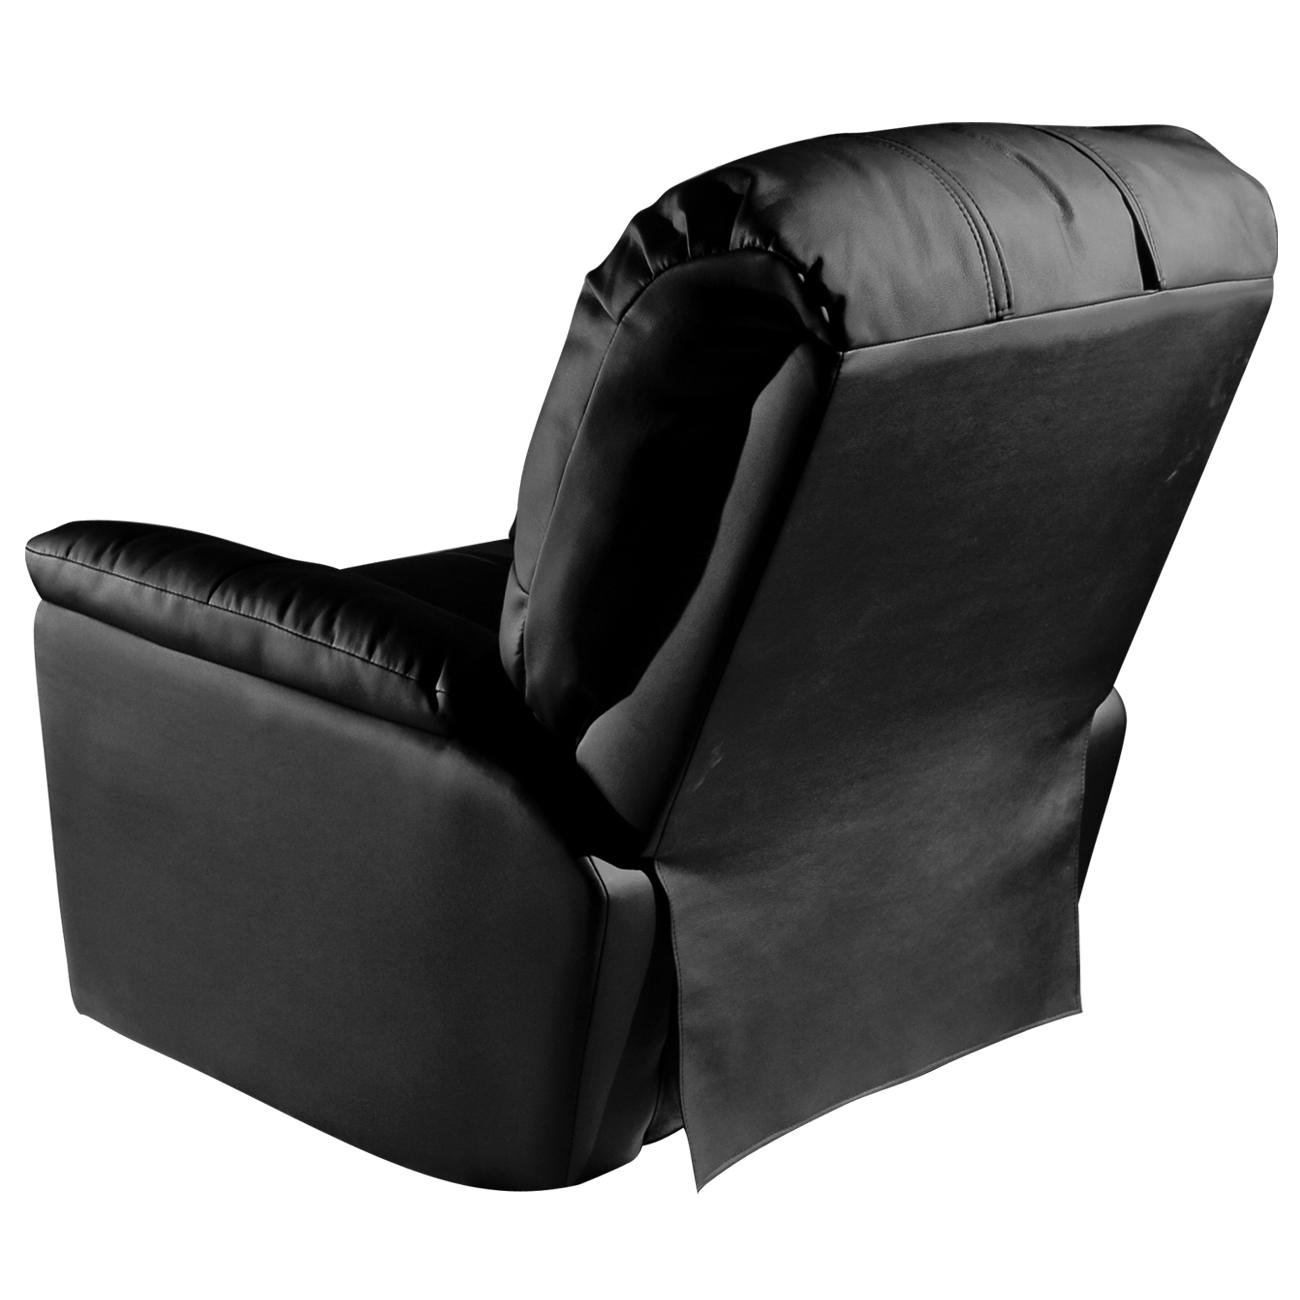 Freedom Rocker Recliner in Commercial Grade Upholstery without Logo